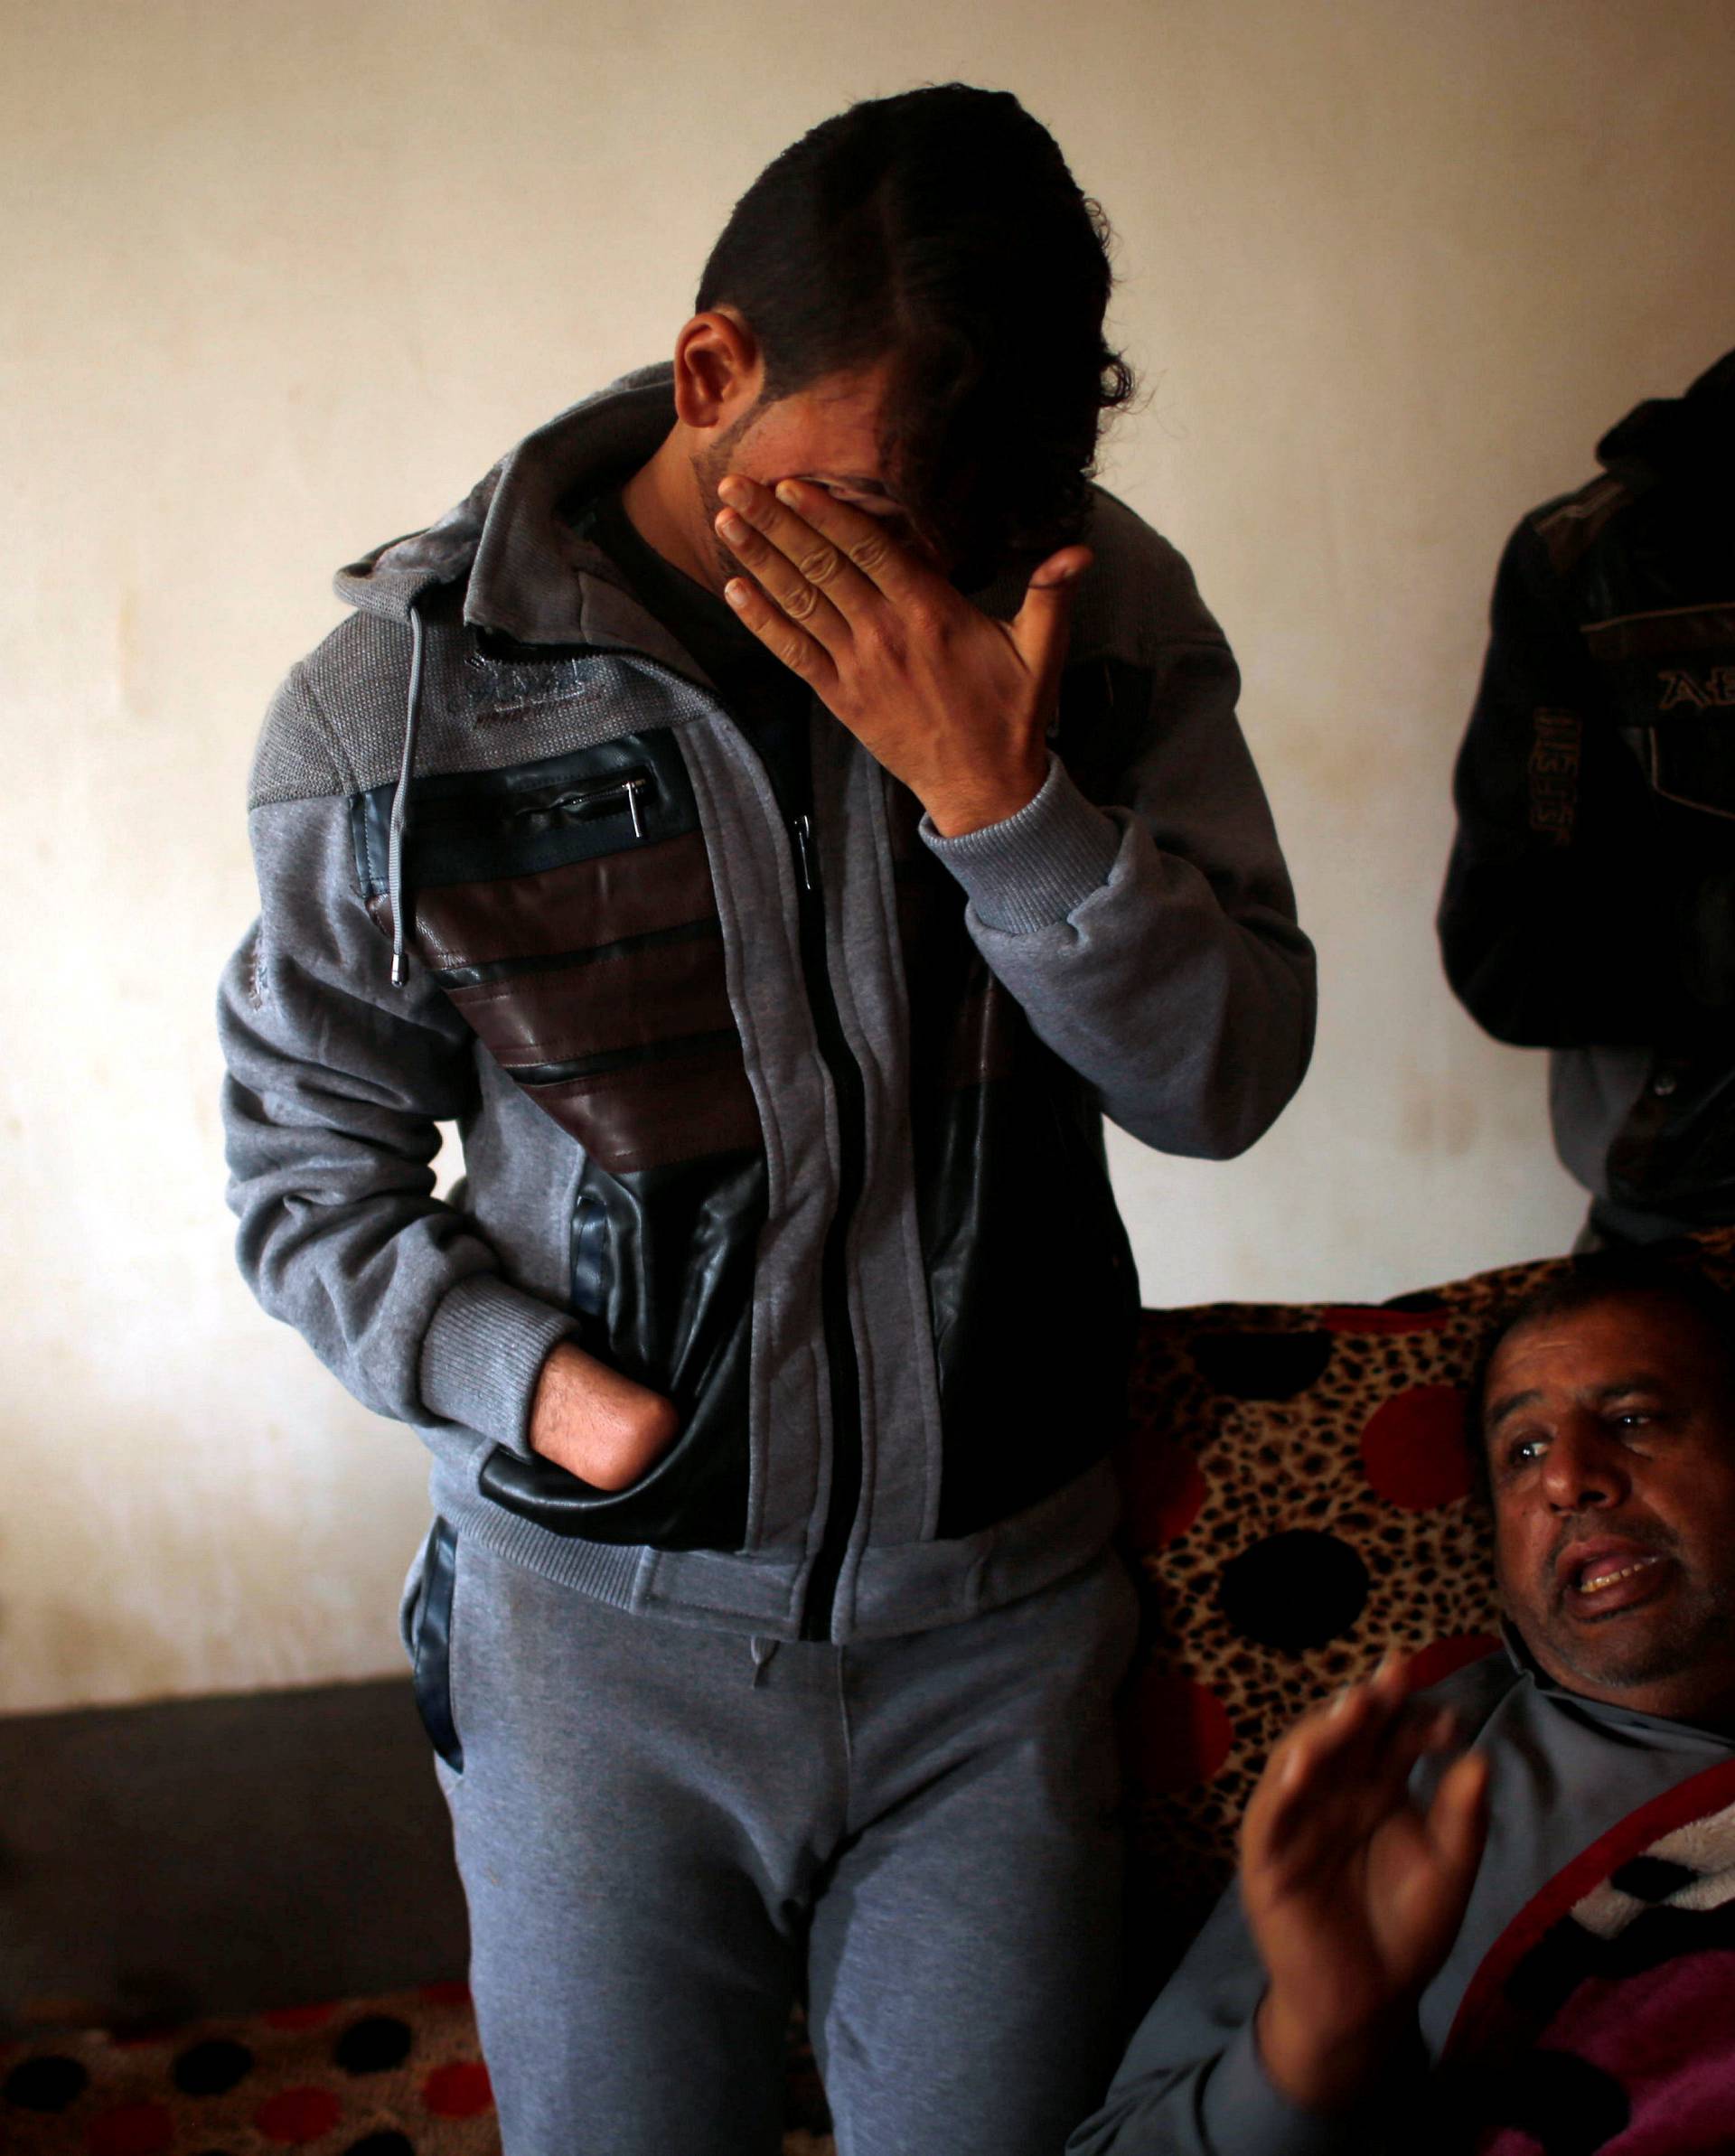 Azad Hassan, whose hand was chopped off by Islamic State militants, cries as he stands beside his wounded father in a house at Nimrud village, south of Mosul